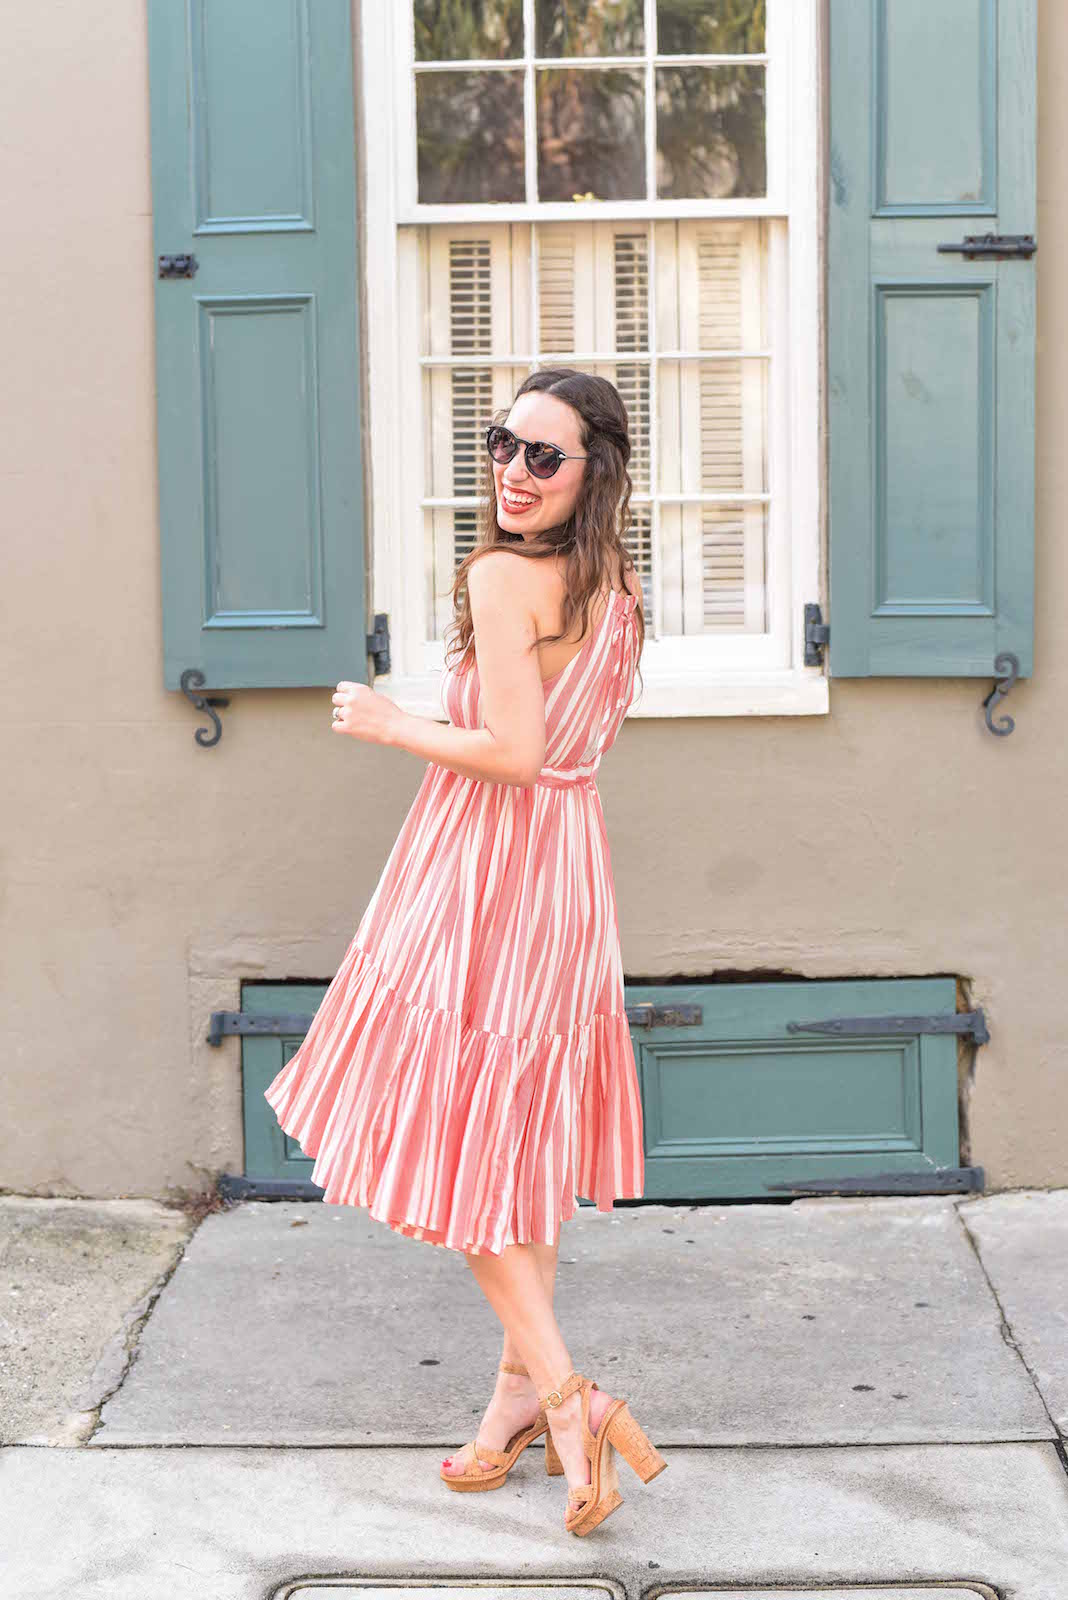 Party dress inspiration in an Anthropologie red and white striped halter dress